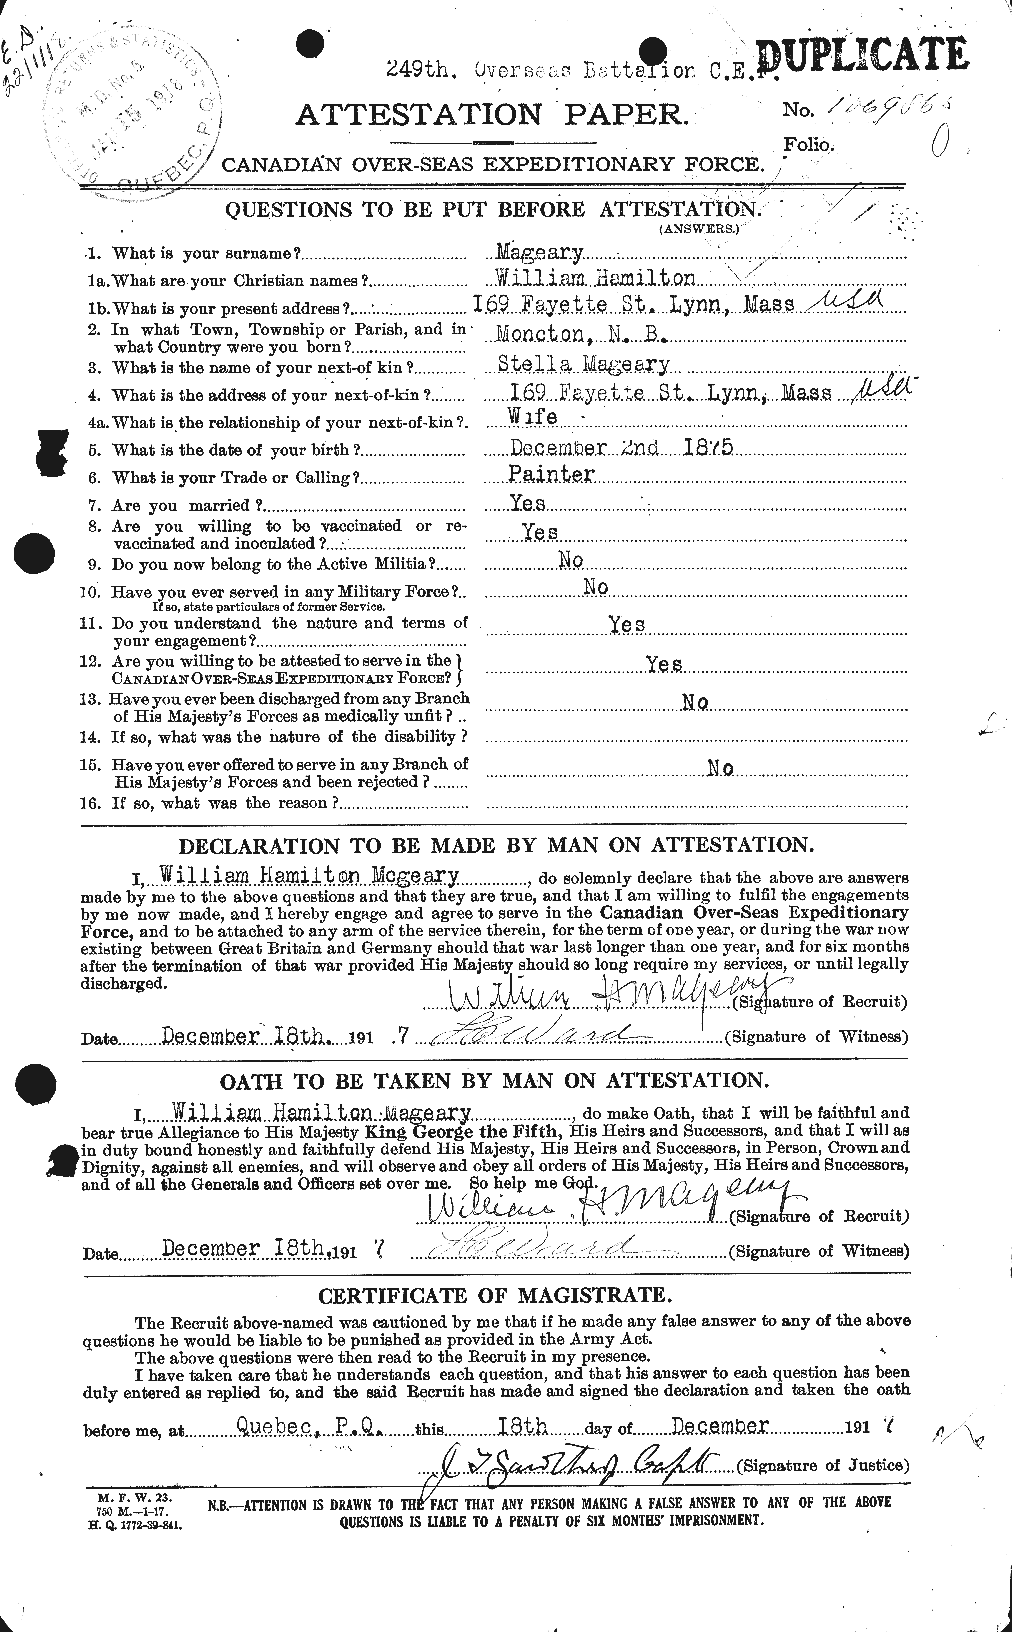 Personnel Records of the First World War - CEF 476767a